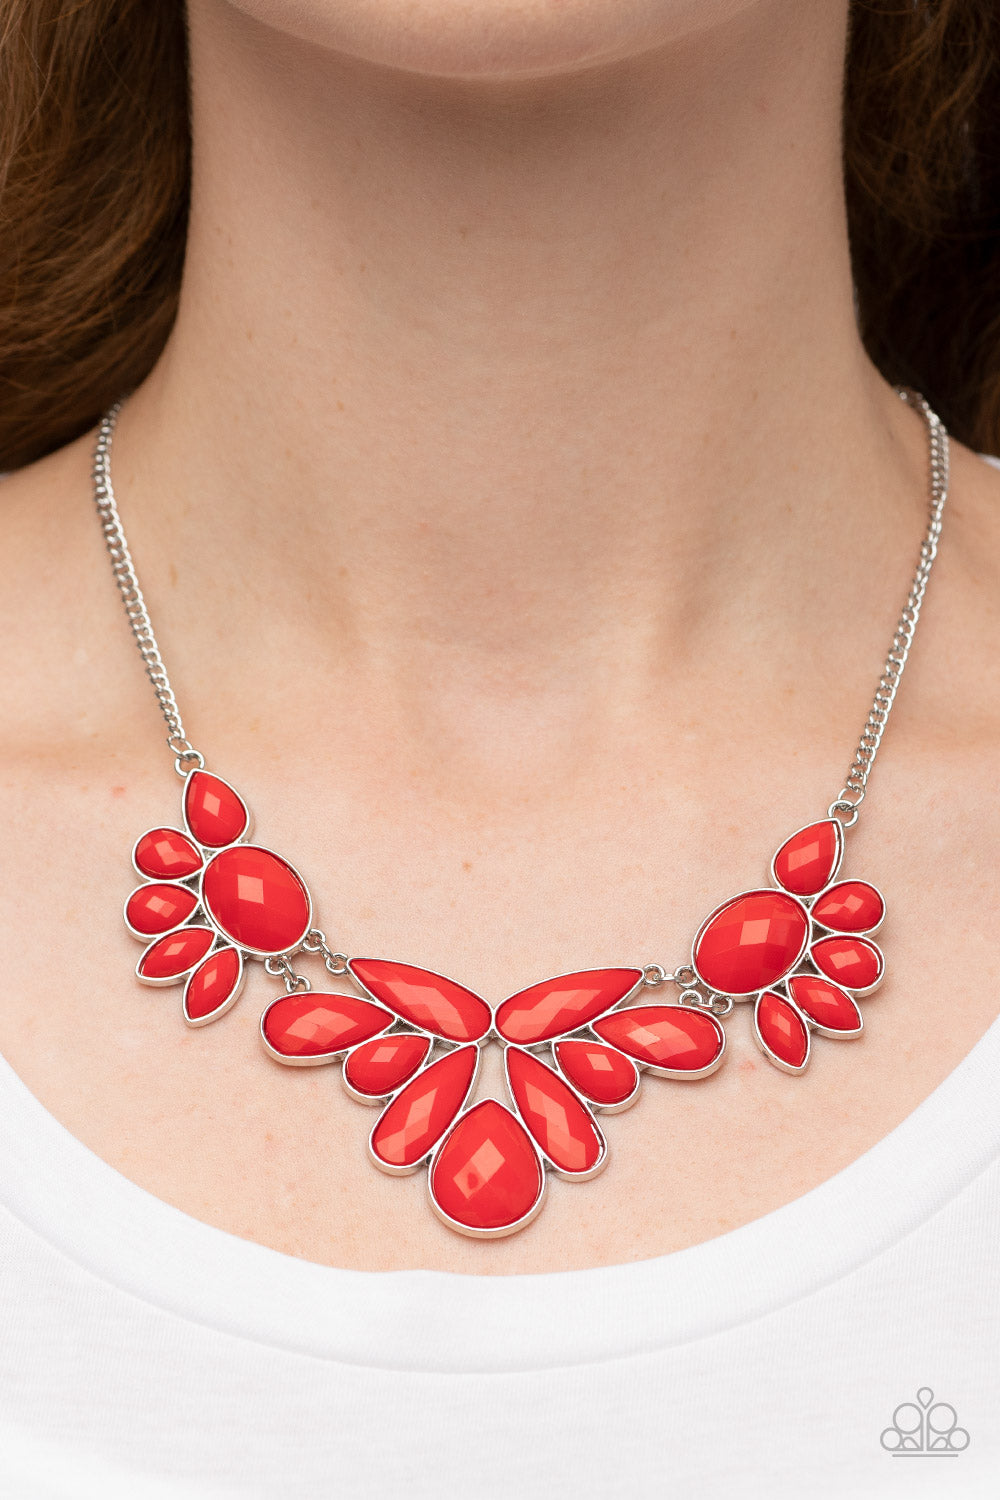 A Passing FAN-cy - Red Paparazzi Necklace